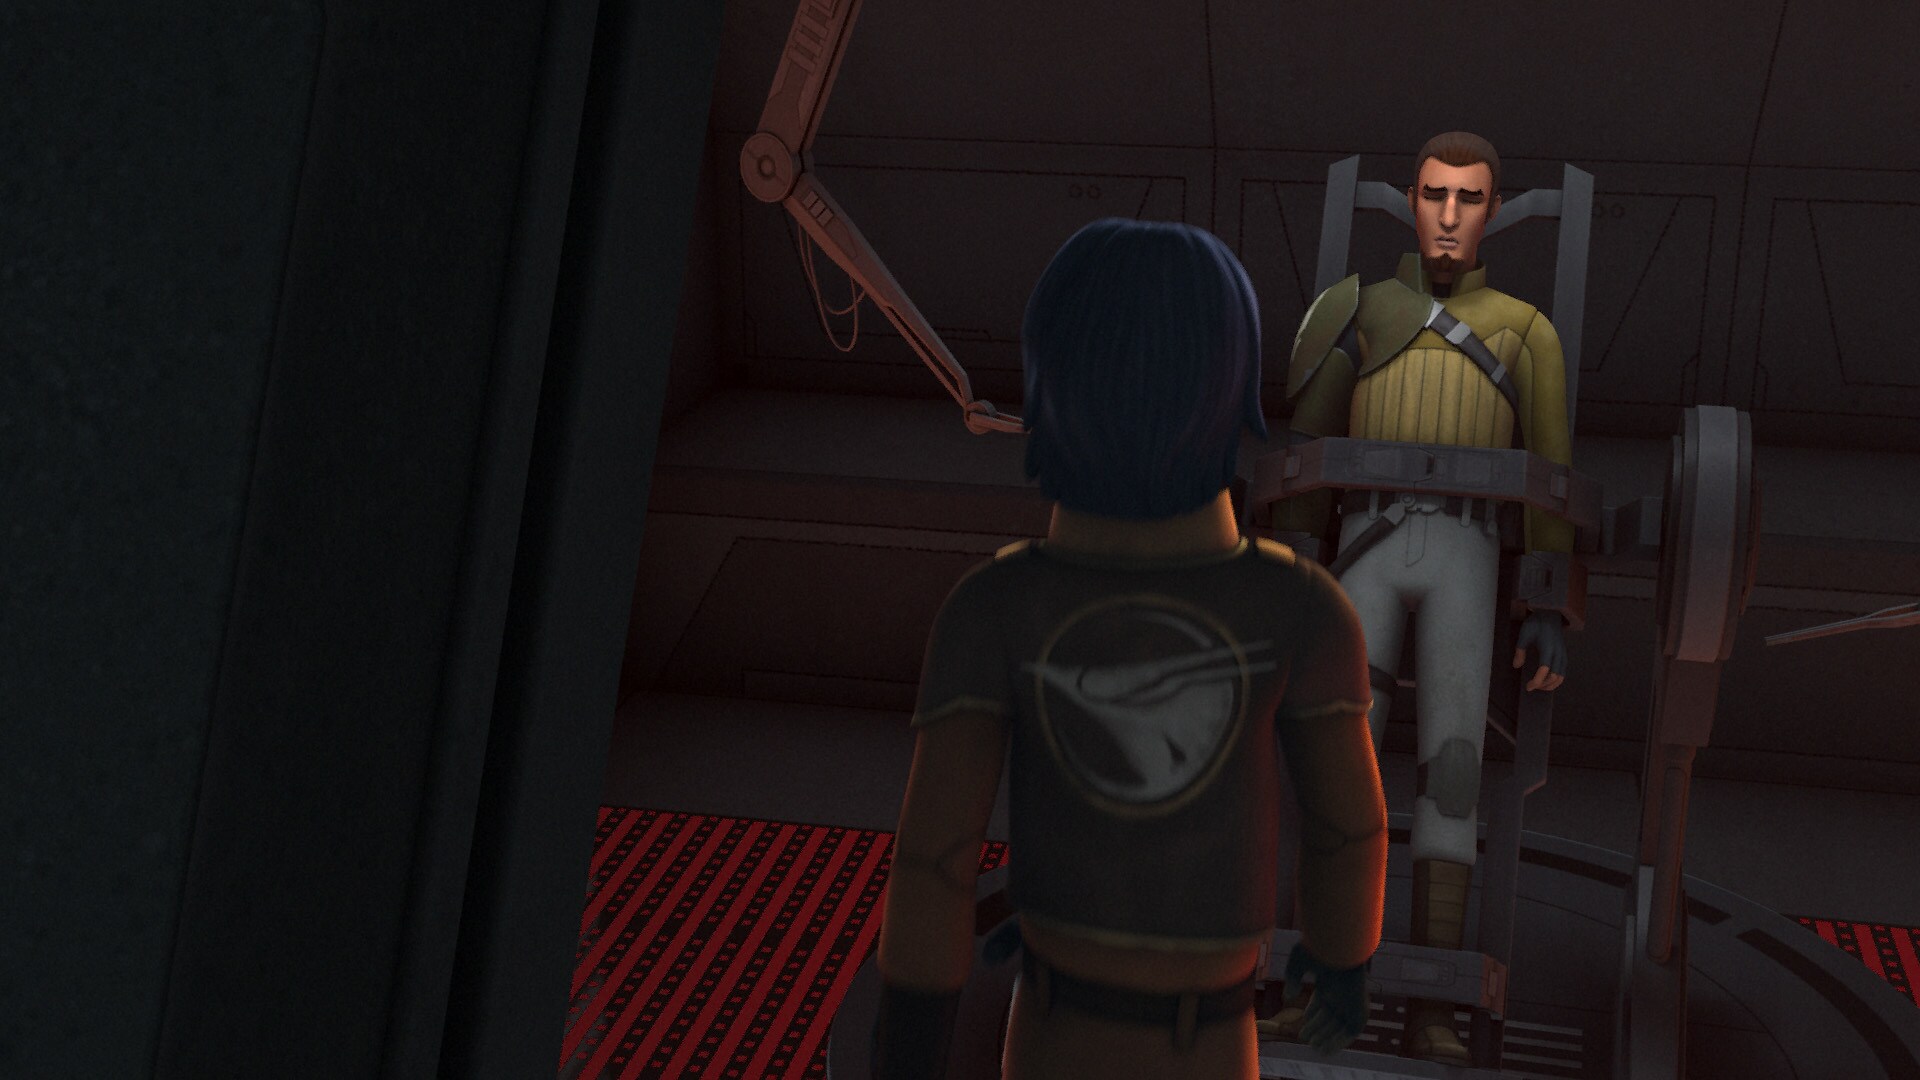 Ezra arrives at Kanan's cell. "You shouldn't have come here," Kanan says. "But I'm glad you did."...